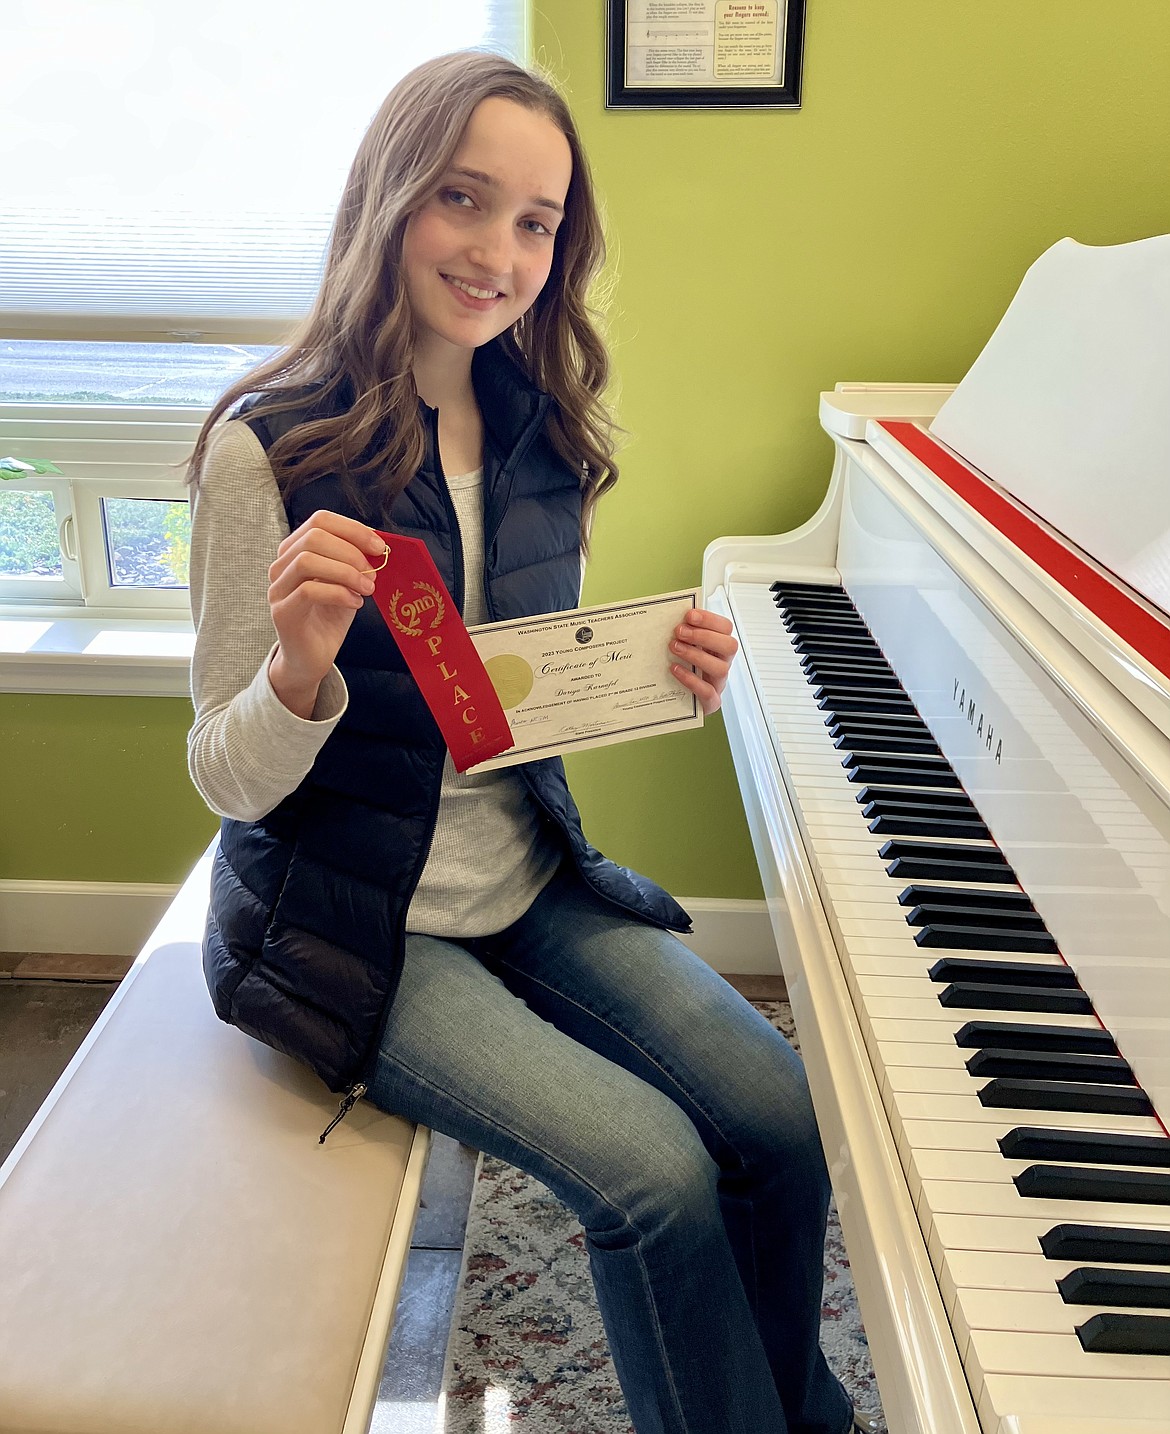 Dariya Karnafel sits at the piano and displays the award she won for her composition, "Sea of Memories." This year was Karnafel's second participating in the Washington State Music Teachers Association's Young Composers Project.